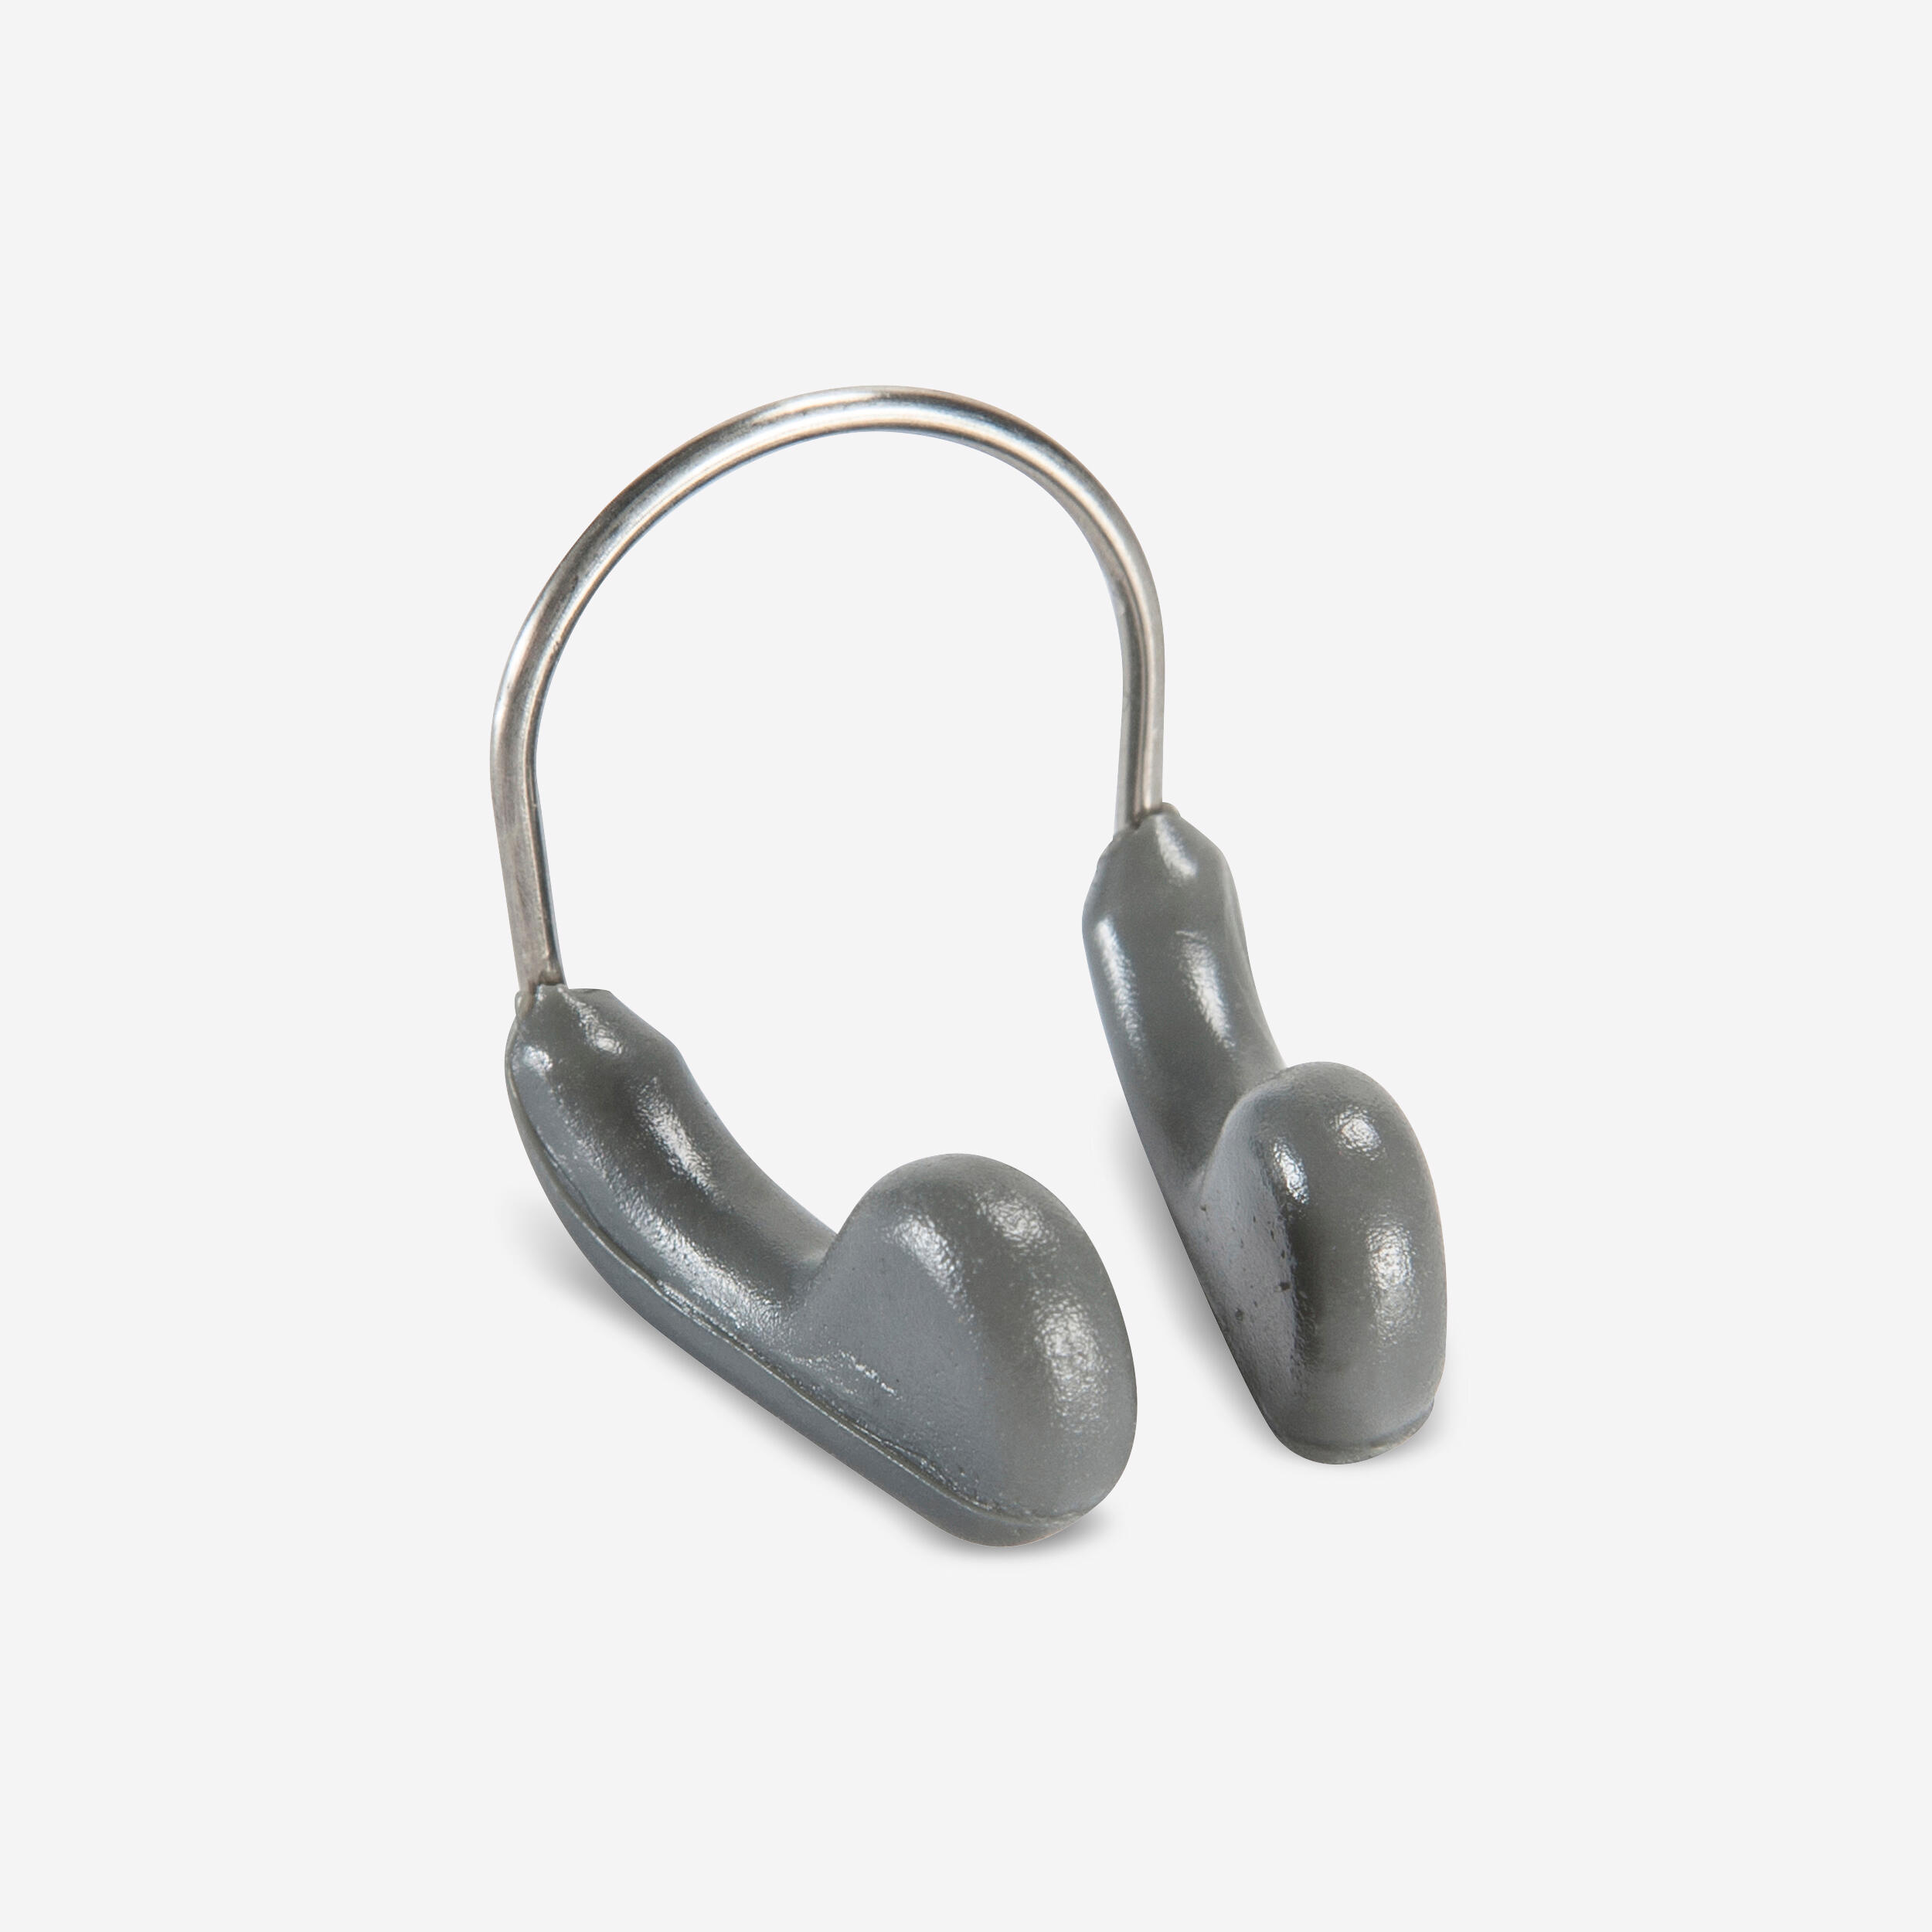 SPEEDO COMPETITION NOSE CLIP - GREY BLUE 1/10